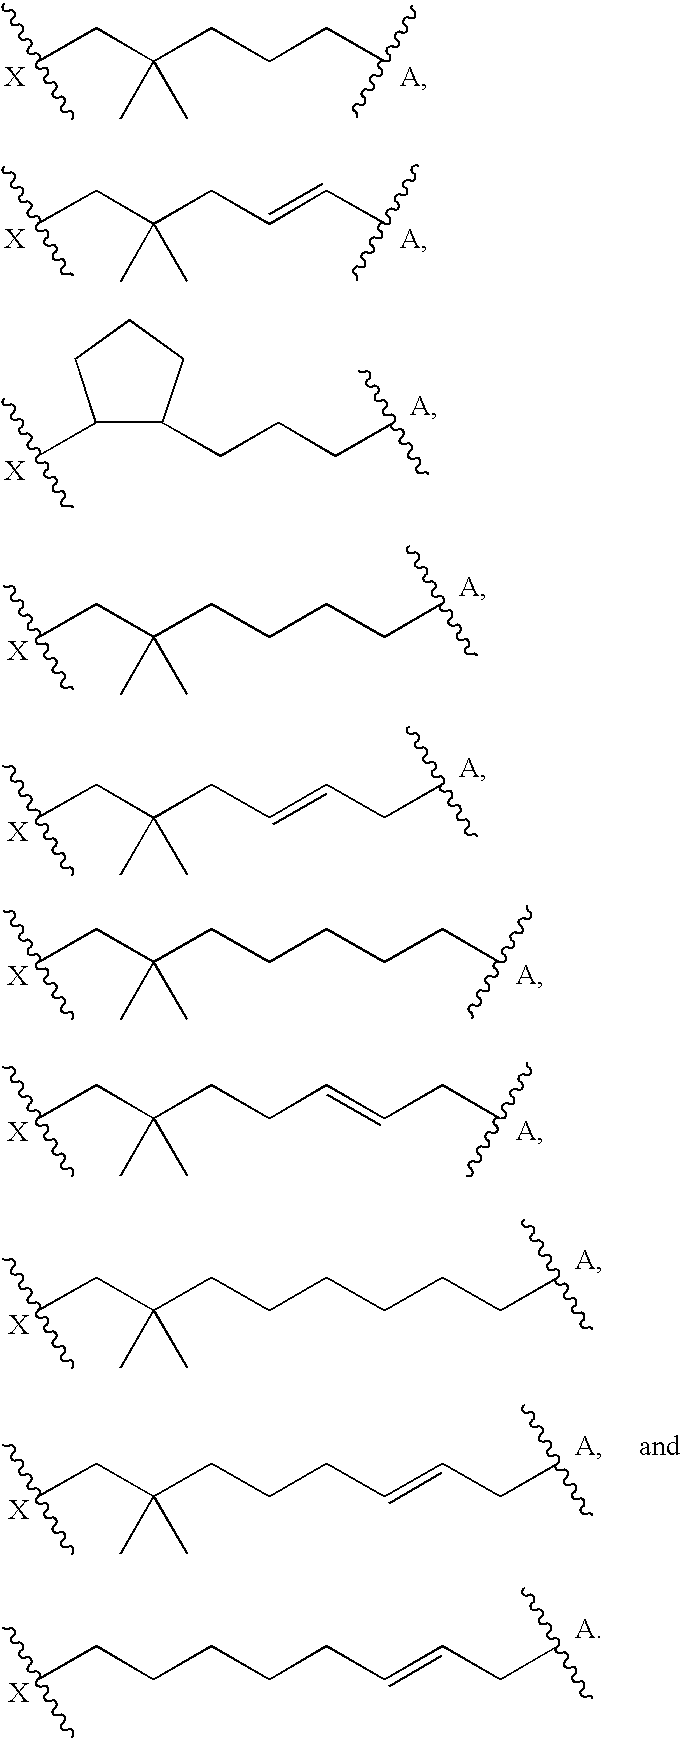 Macrocyclic compounds as antiviral agents